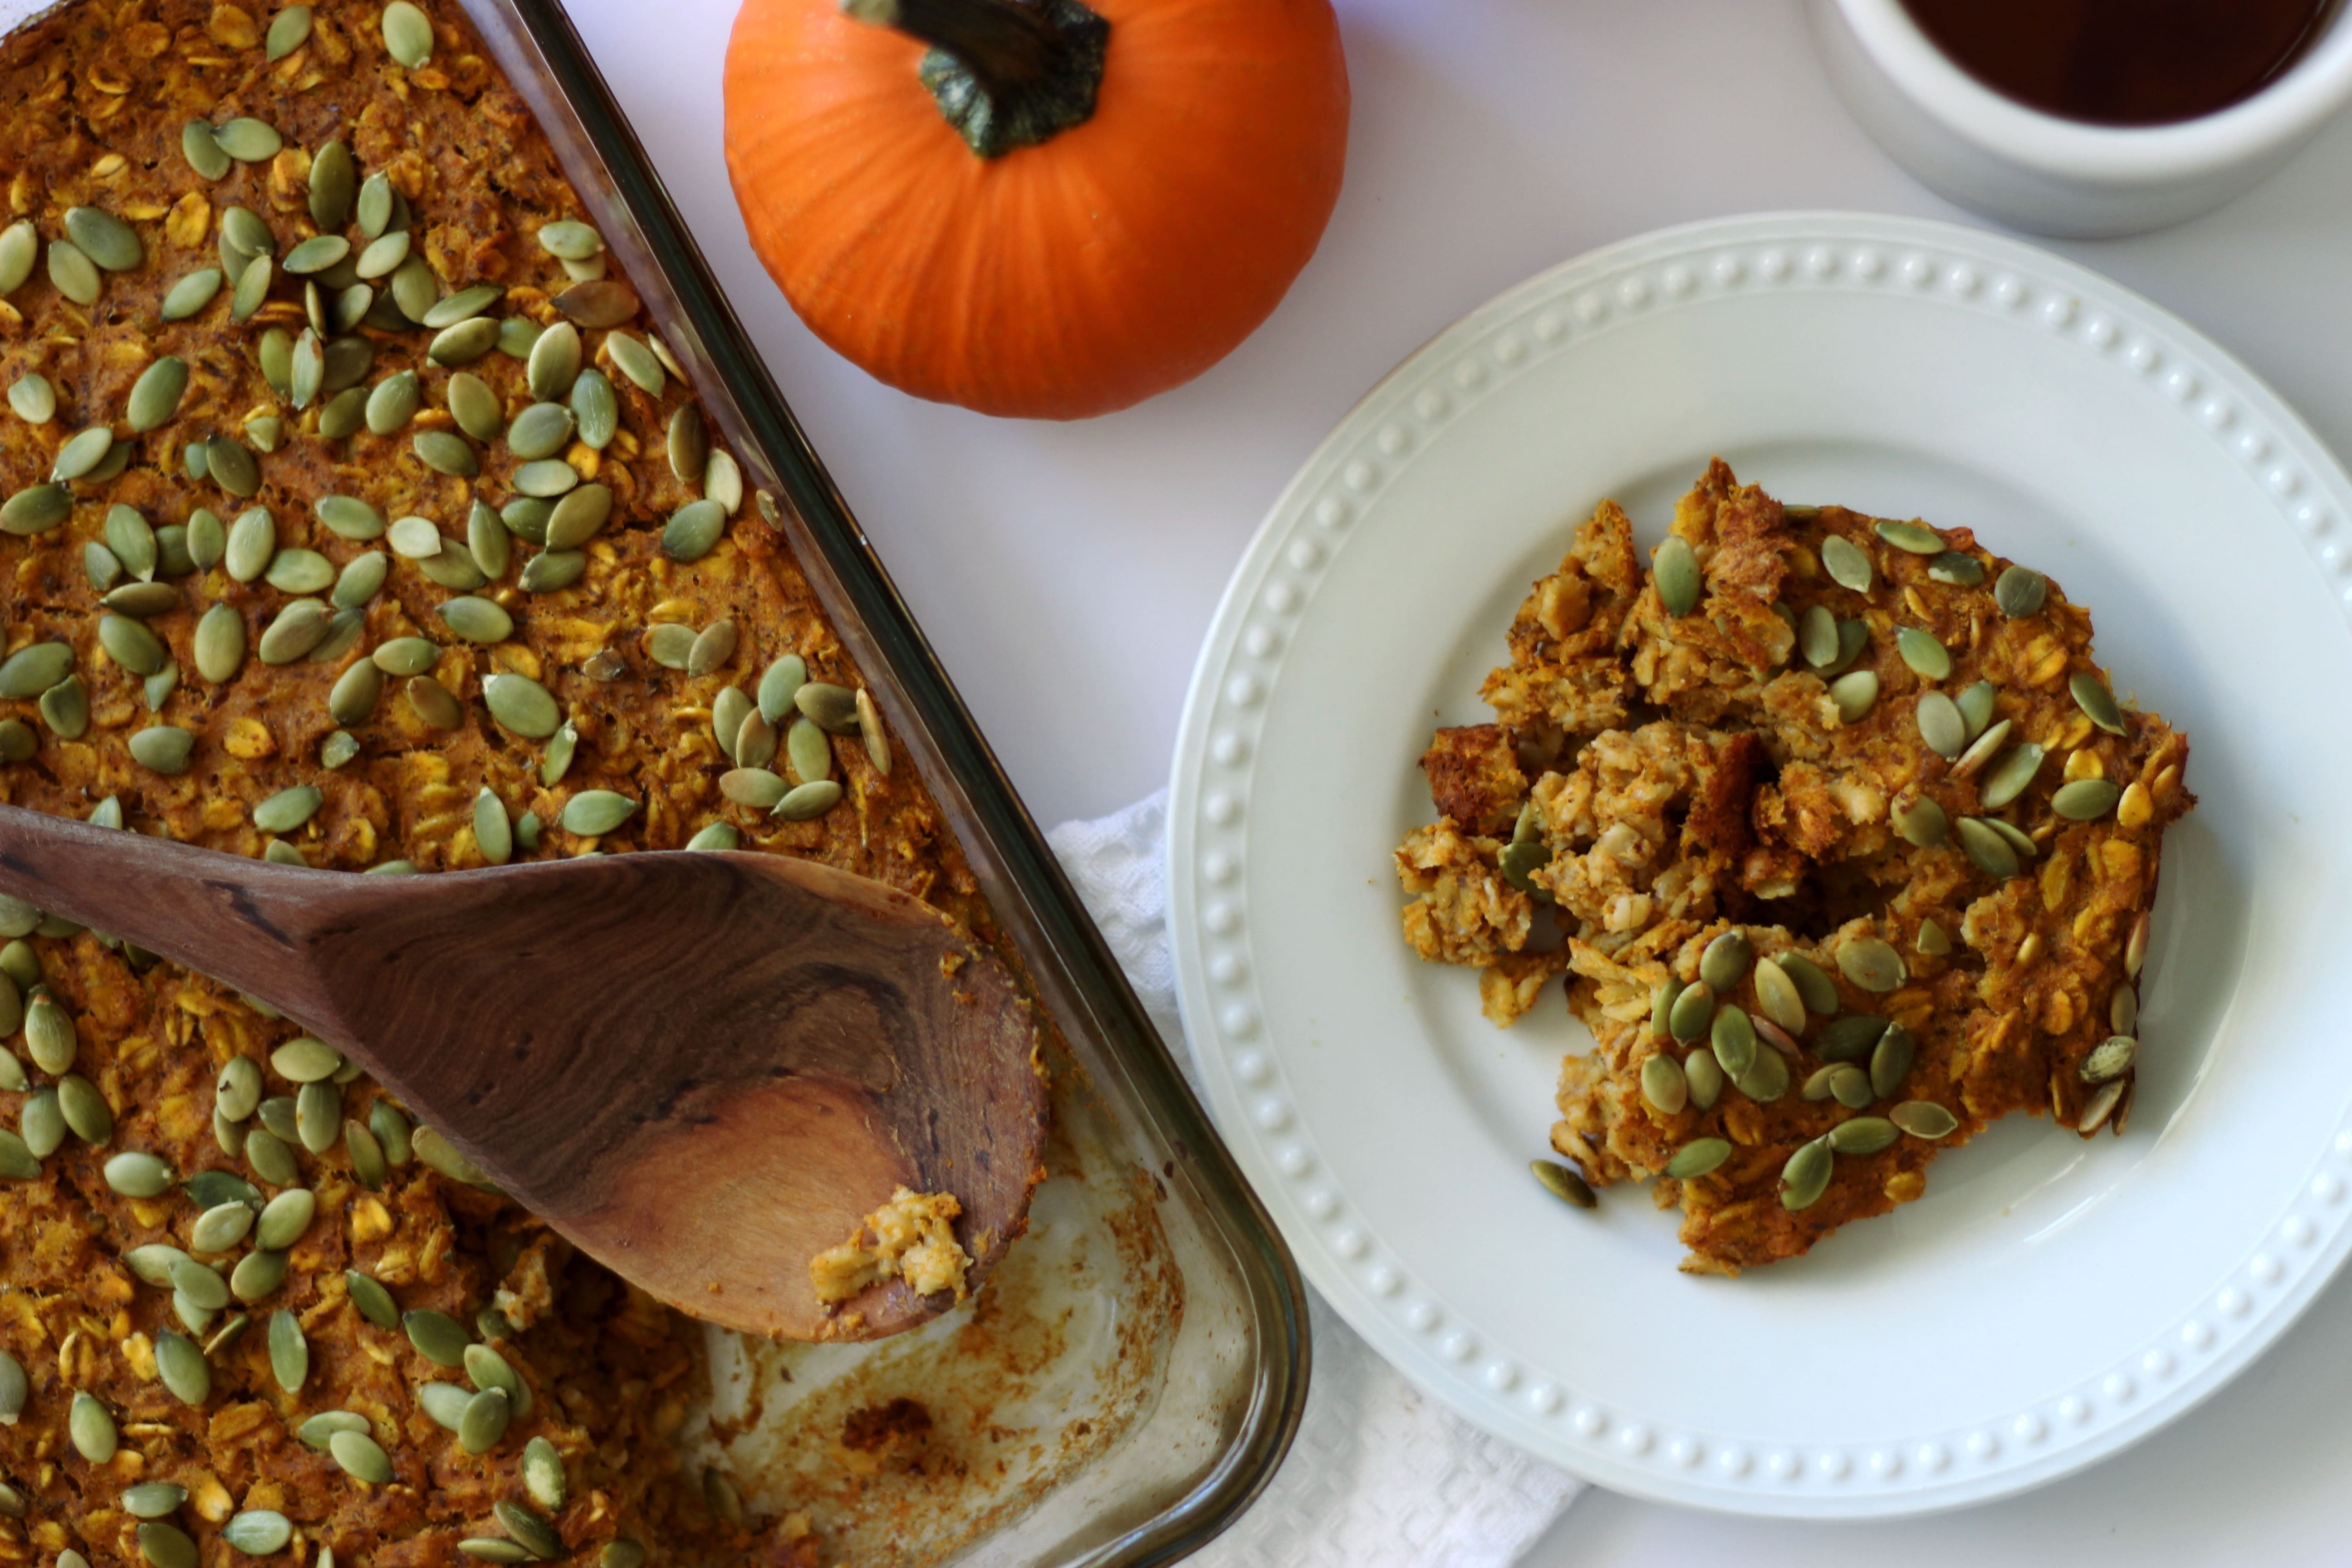 20 Meals Your Postnatal Clients Will Love: Pumpkin Pie Baked Oatmeal